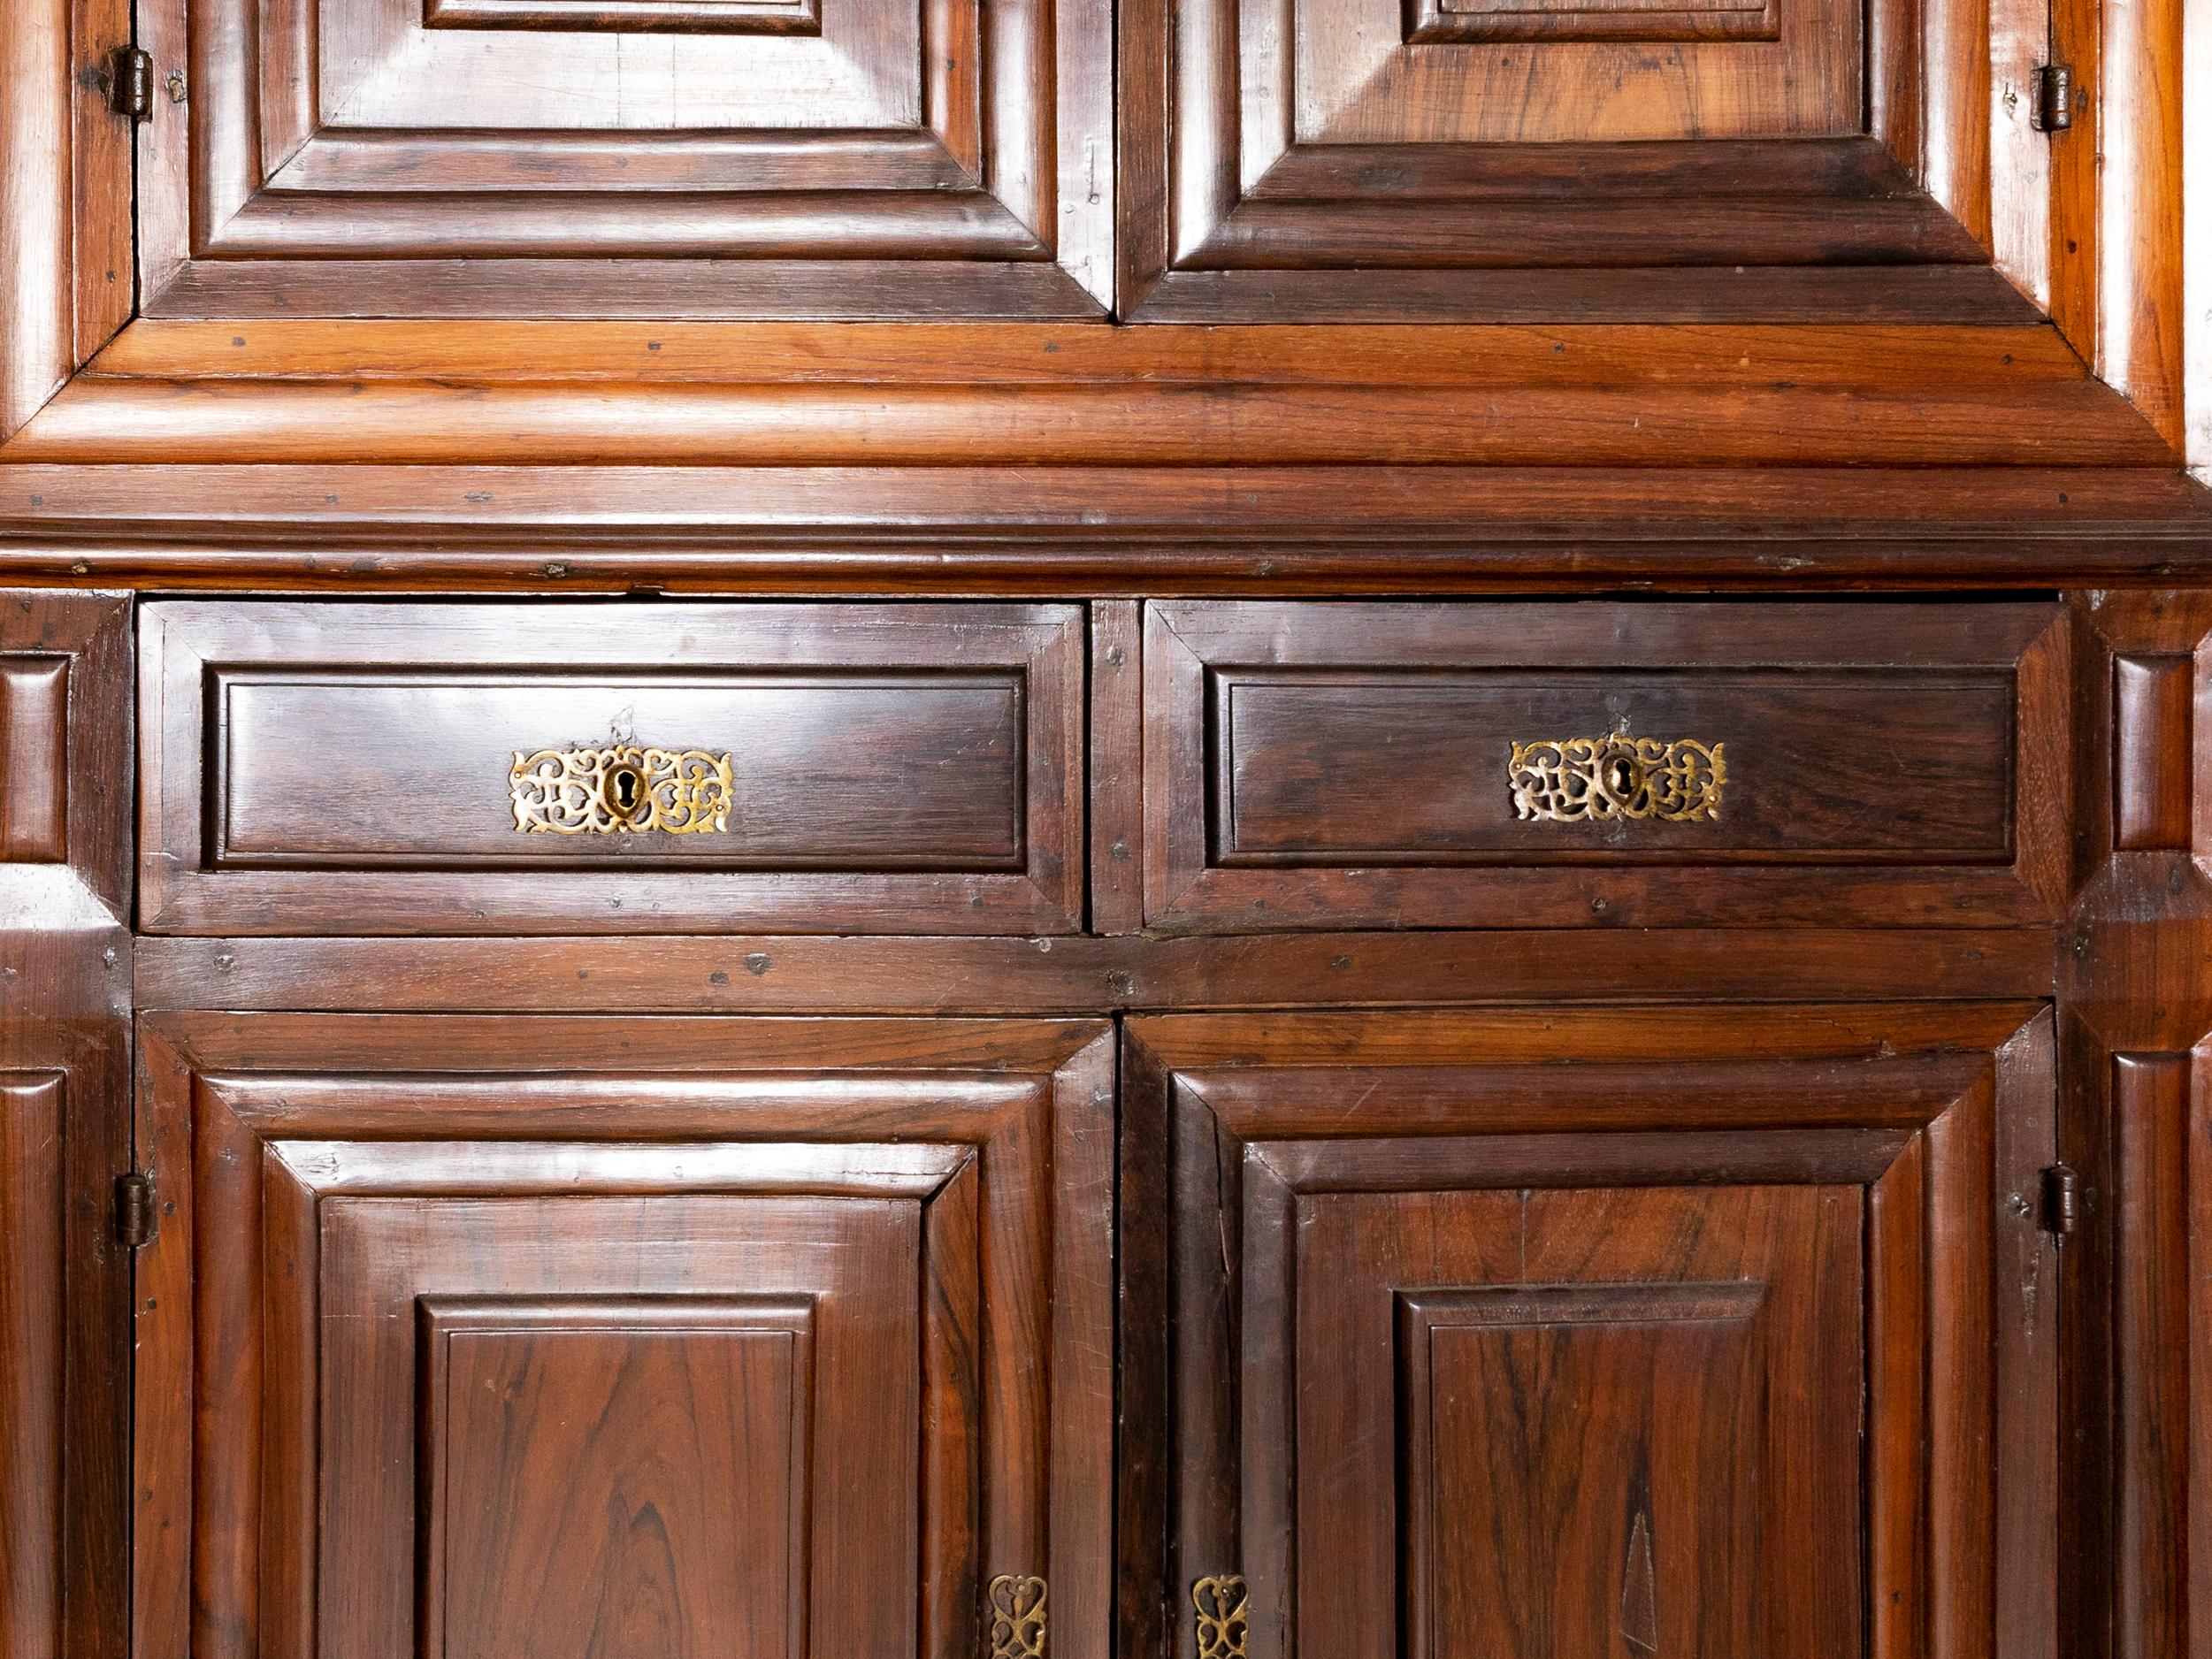  A 17th Century Wardrobe unit in solid Brazilian rosewood, four large sized doors and two large drawers with details and interior in Vinhático wood (Madeira Mahogany), brass hardware, paneled doors and itched rosewood friezes. 
In good conditions,